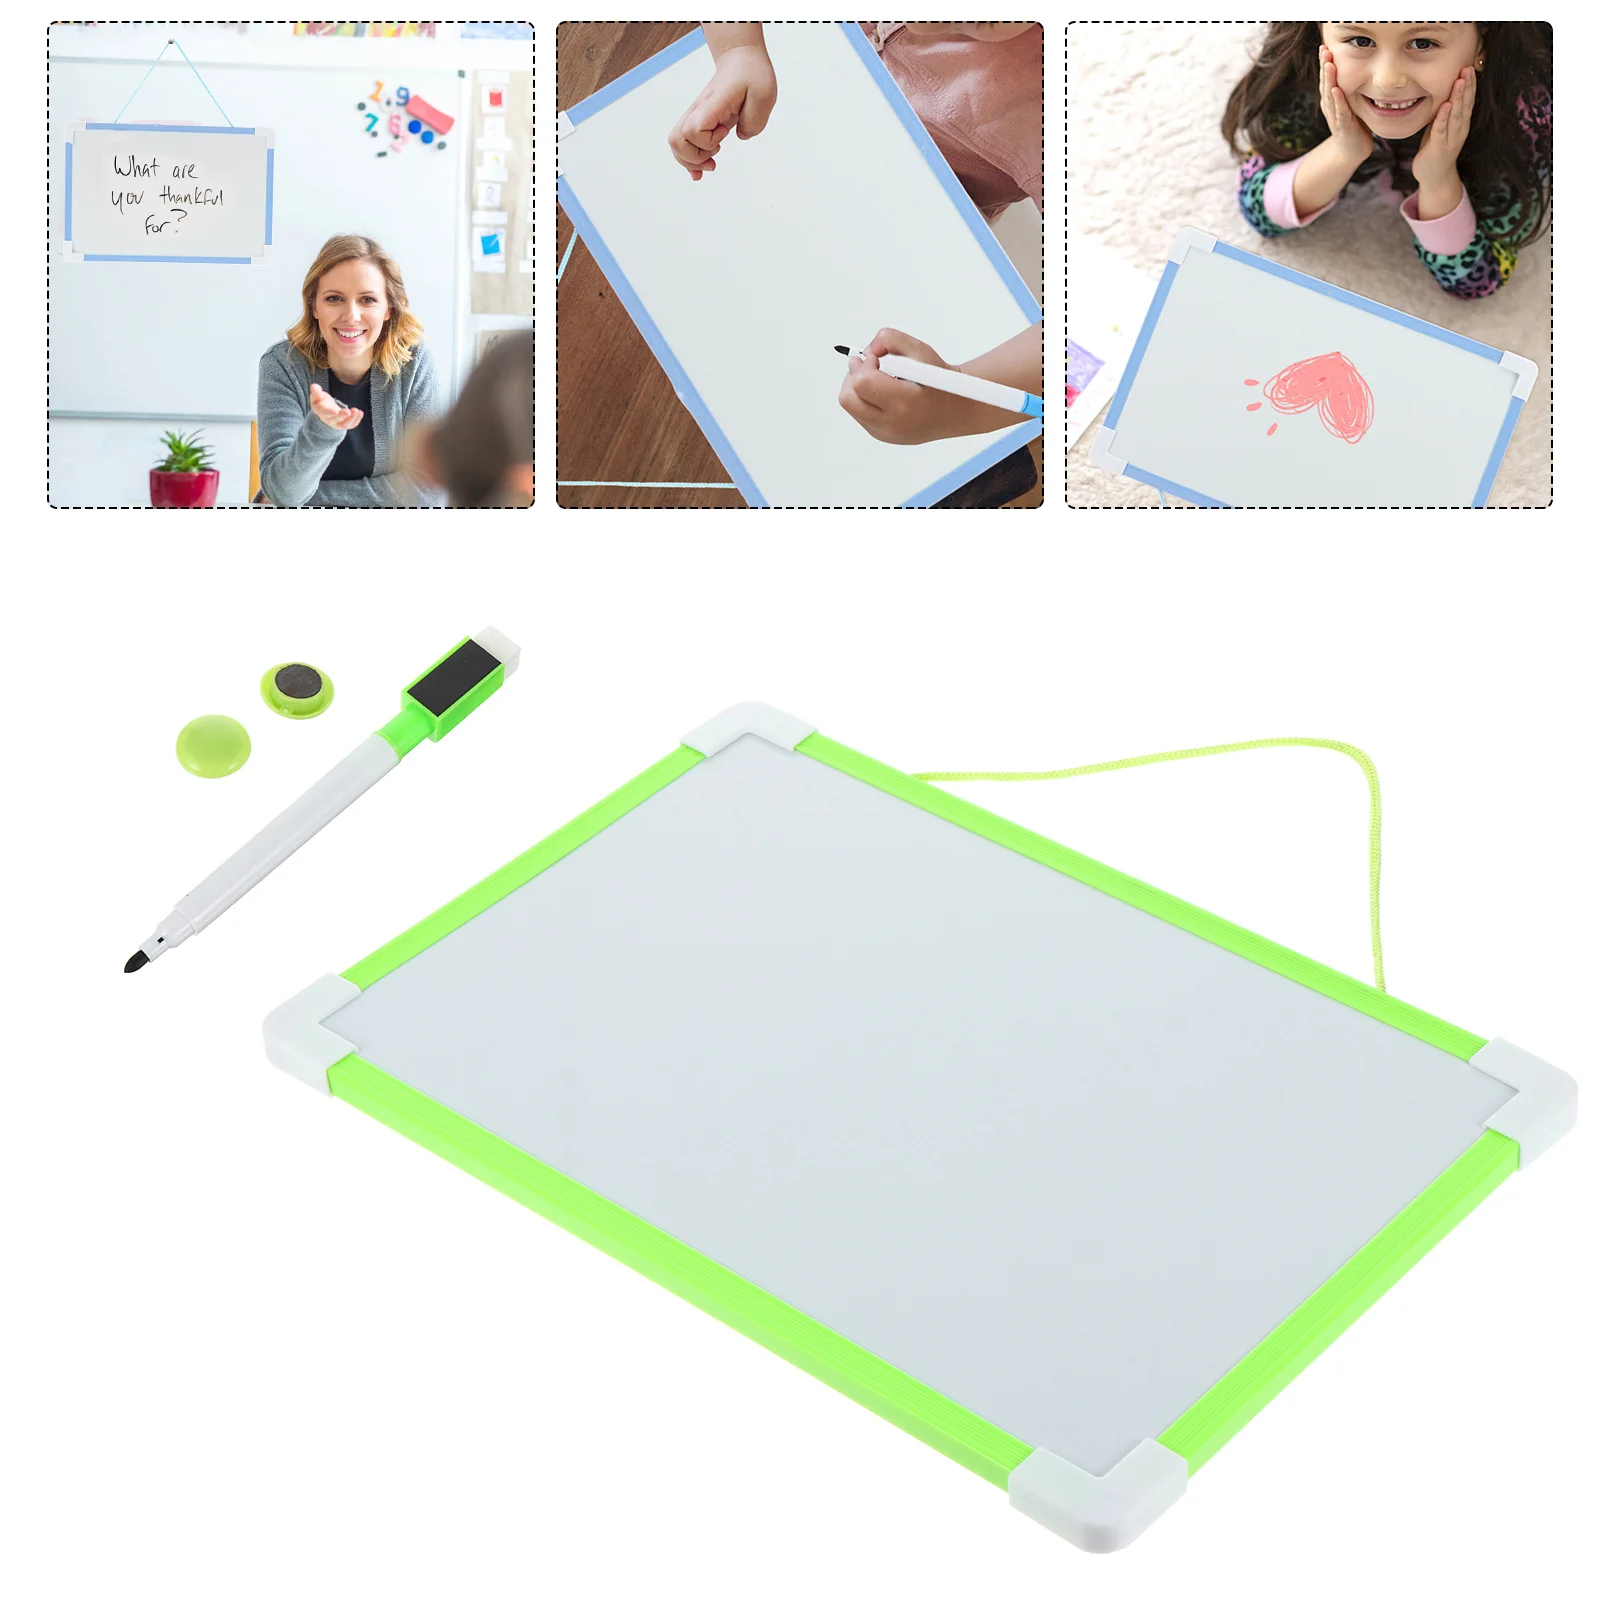 https://ae01.alicdn.com/kf/Sdeaf5cdcd21349ca801e743a12fca667A/Board-Dry-Erase-Whiteboard-White-Writing-Wall-Kids-Hanging-Double-Sided-Erasable-Drawing-Mini-Message-Planner.jpg